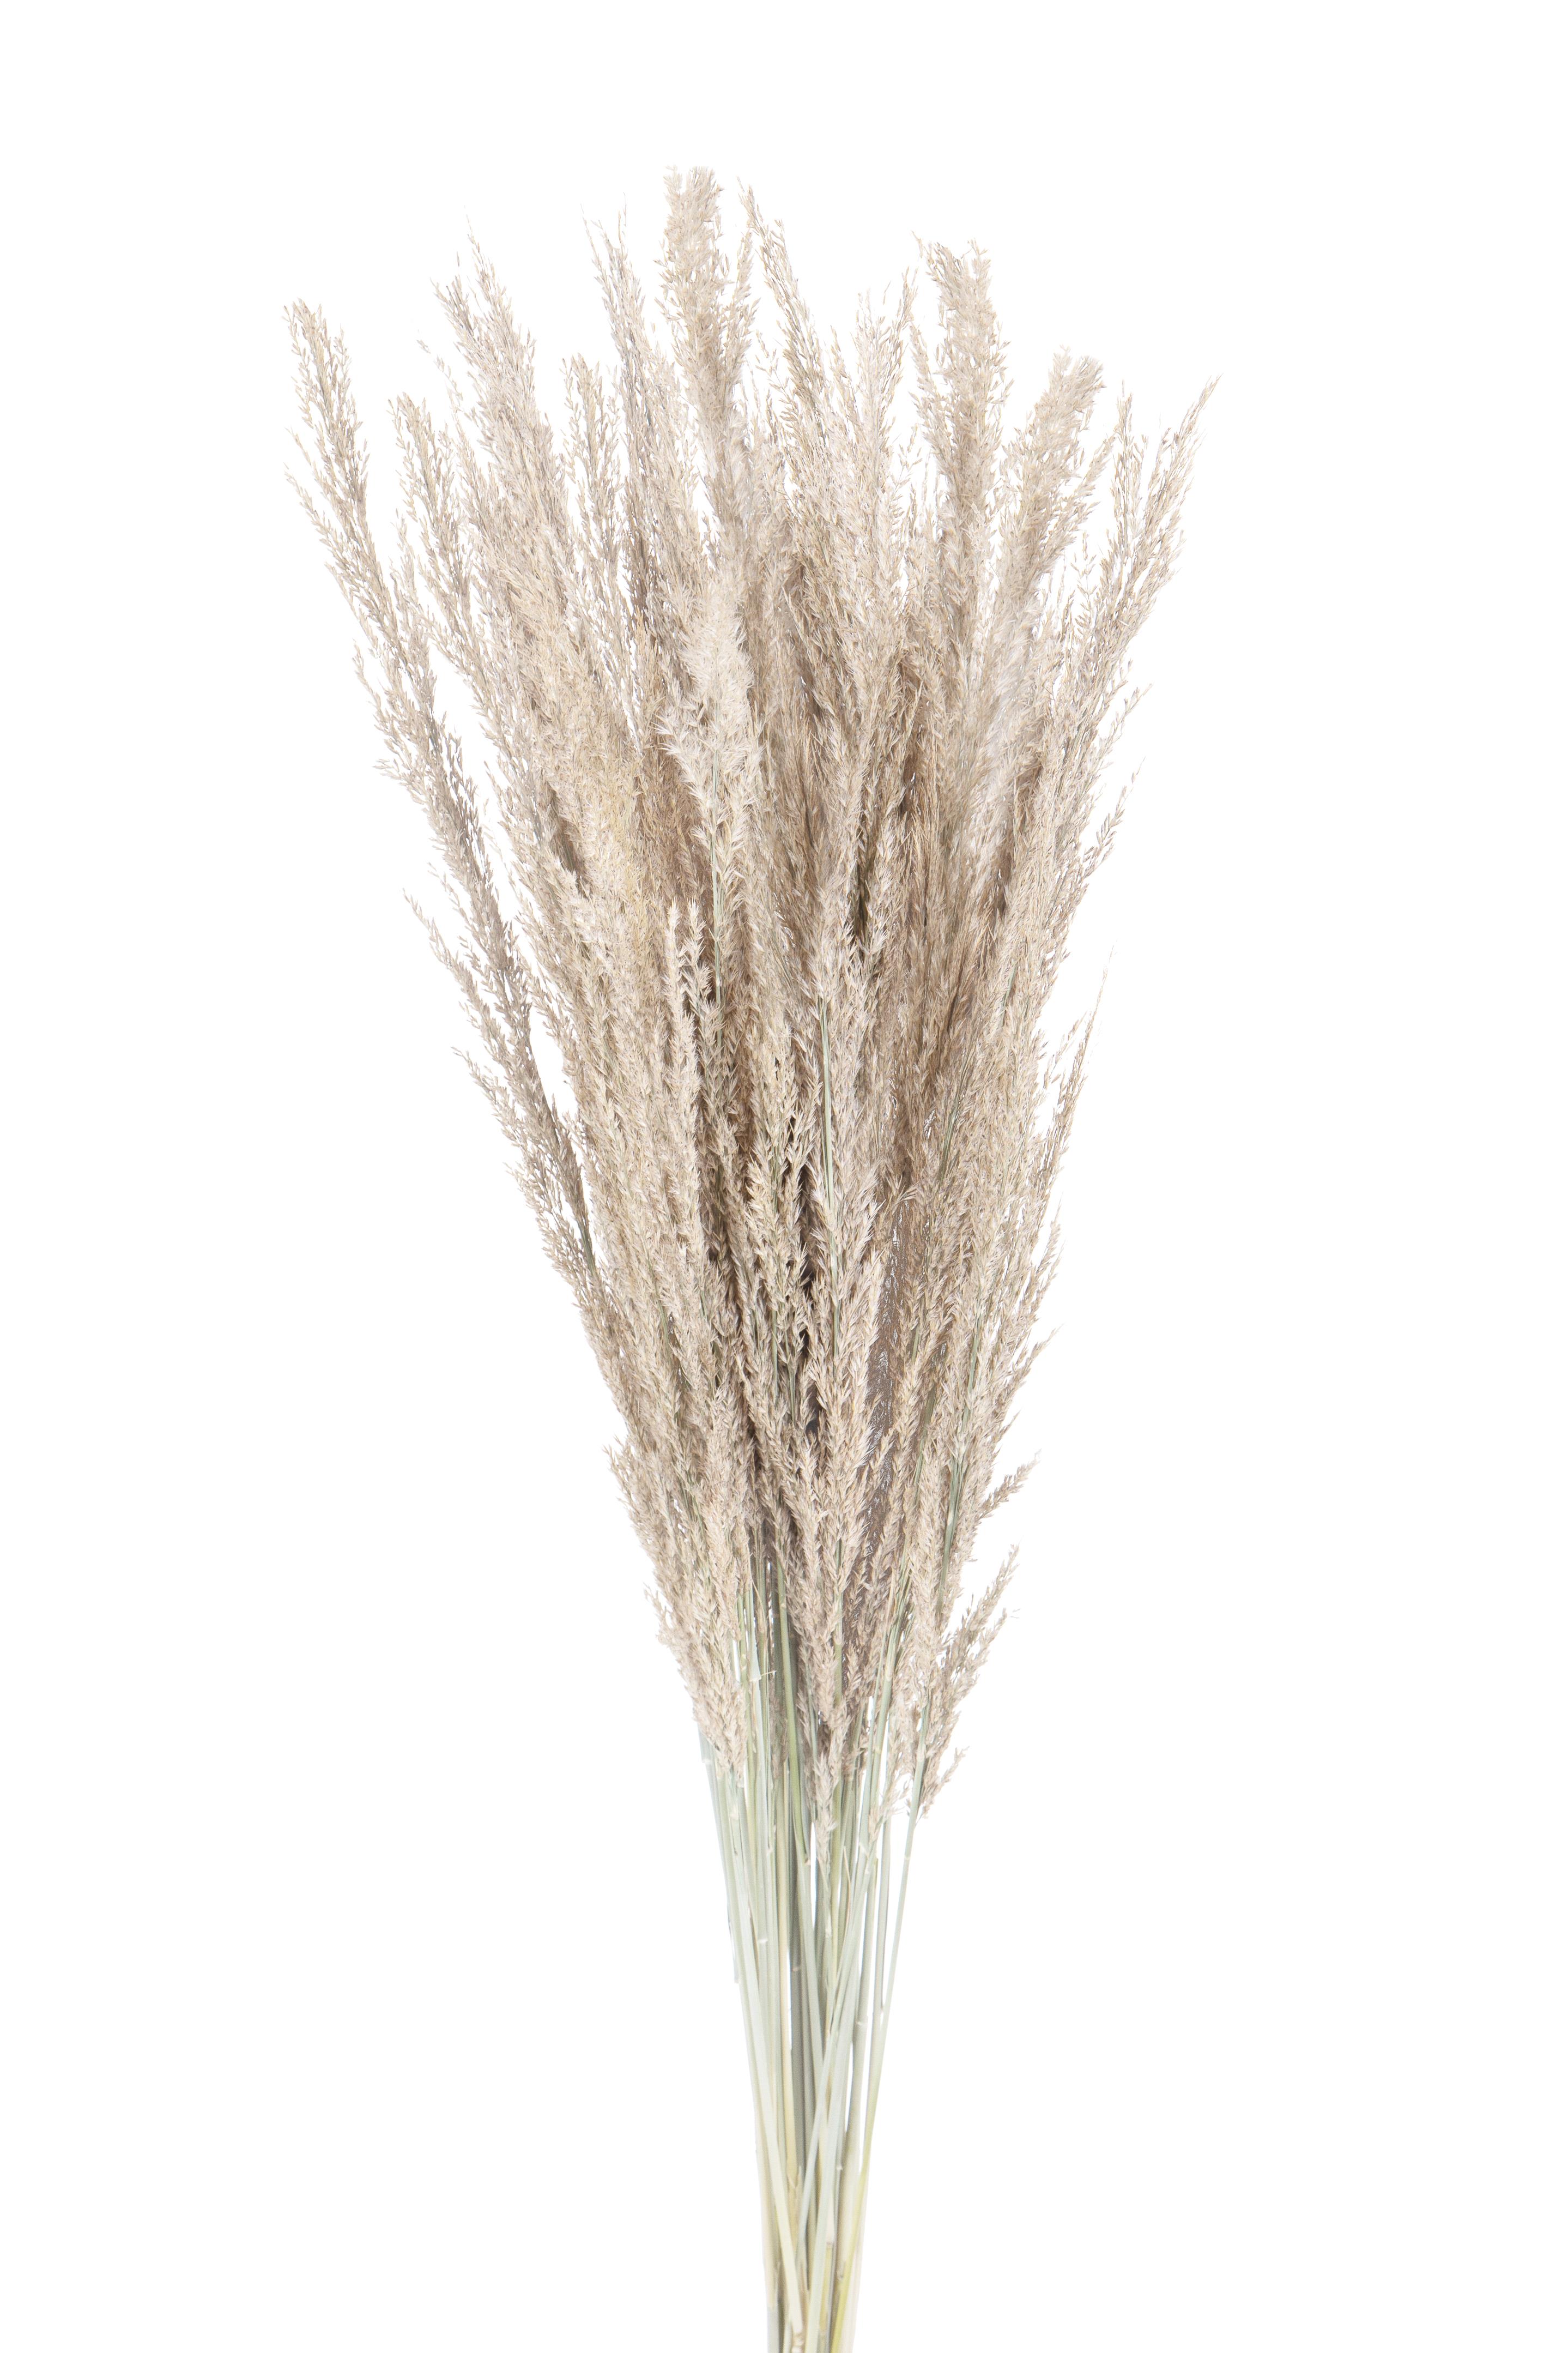 NATURAL PRODUCTS DRIED FLOWERS AND ERBS, COLORED GRASS AND FLOWERS, PIUME ERIANTHUS 20 PZ C.A FINI 110 CM